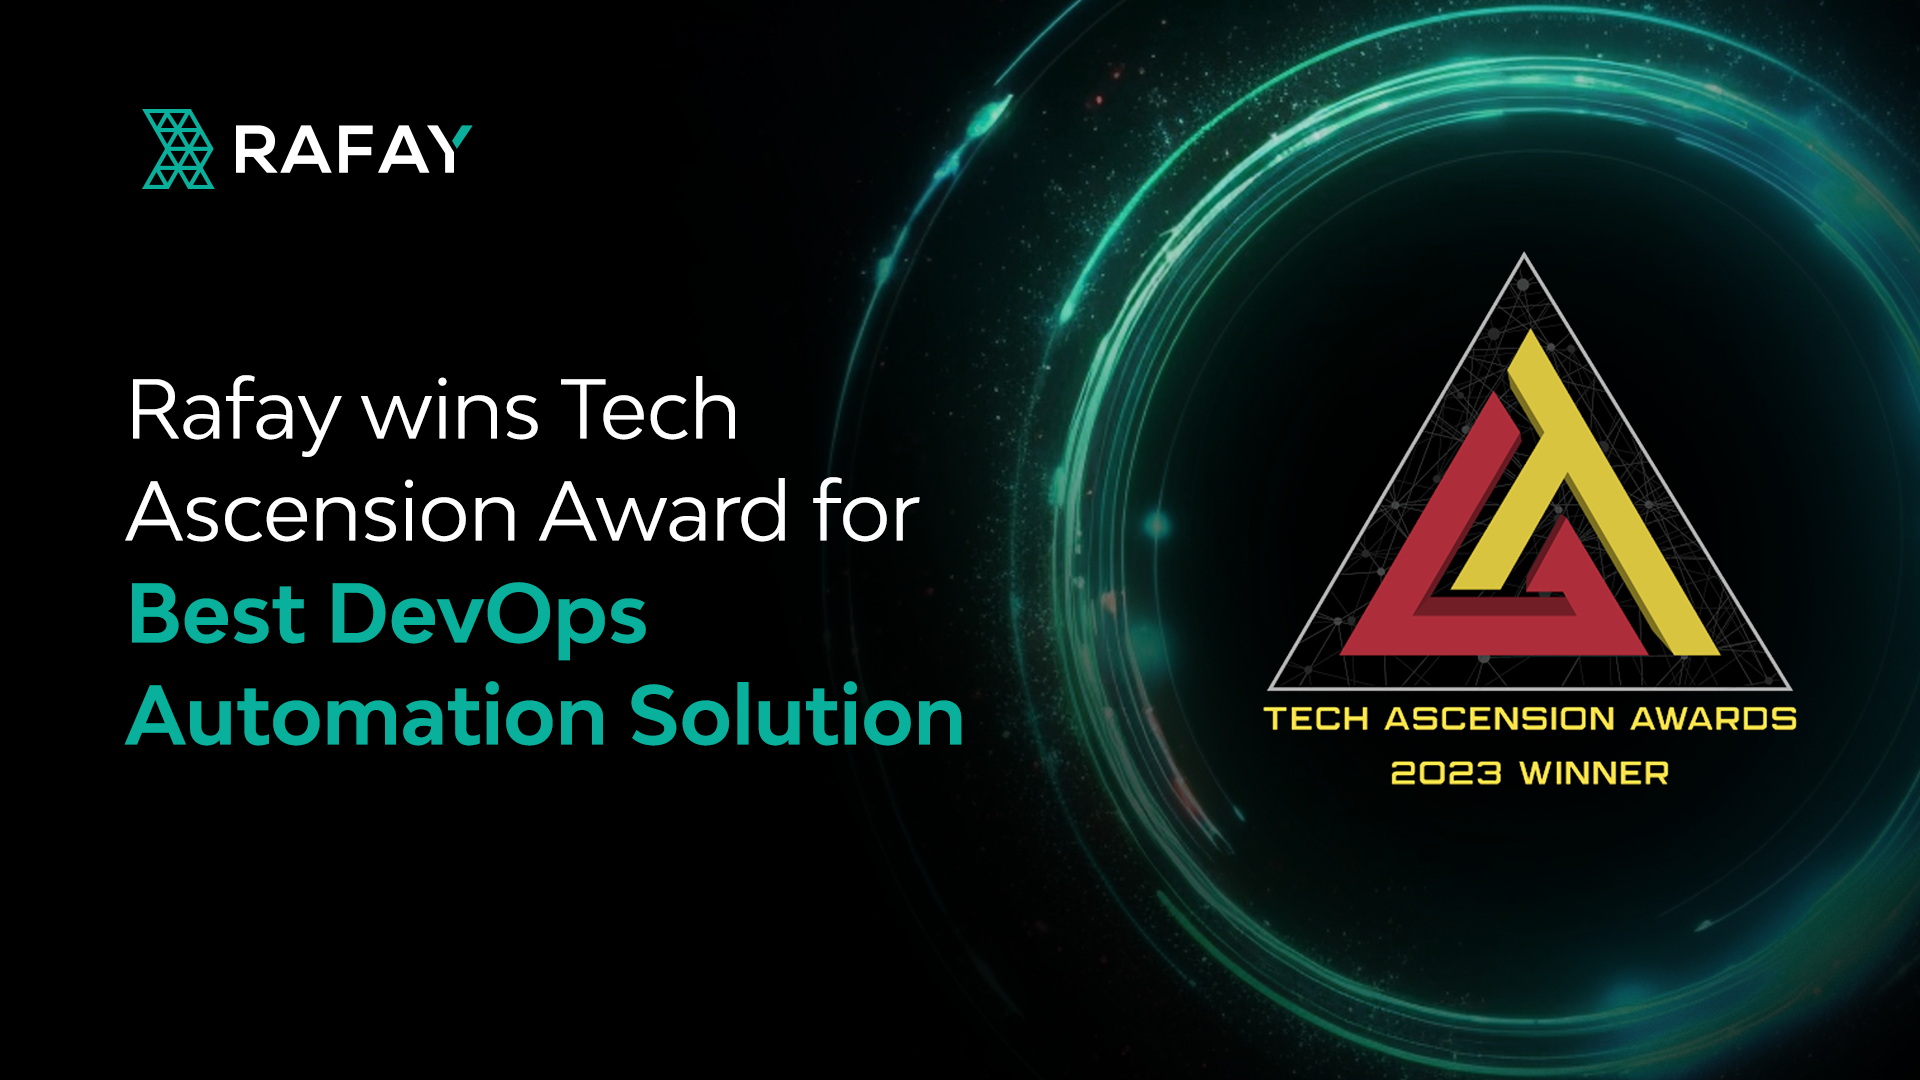 Image for Rafay is a Tech Ascension Award Winner for Best DevOps Automation Solution